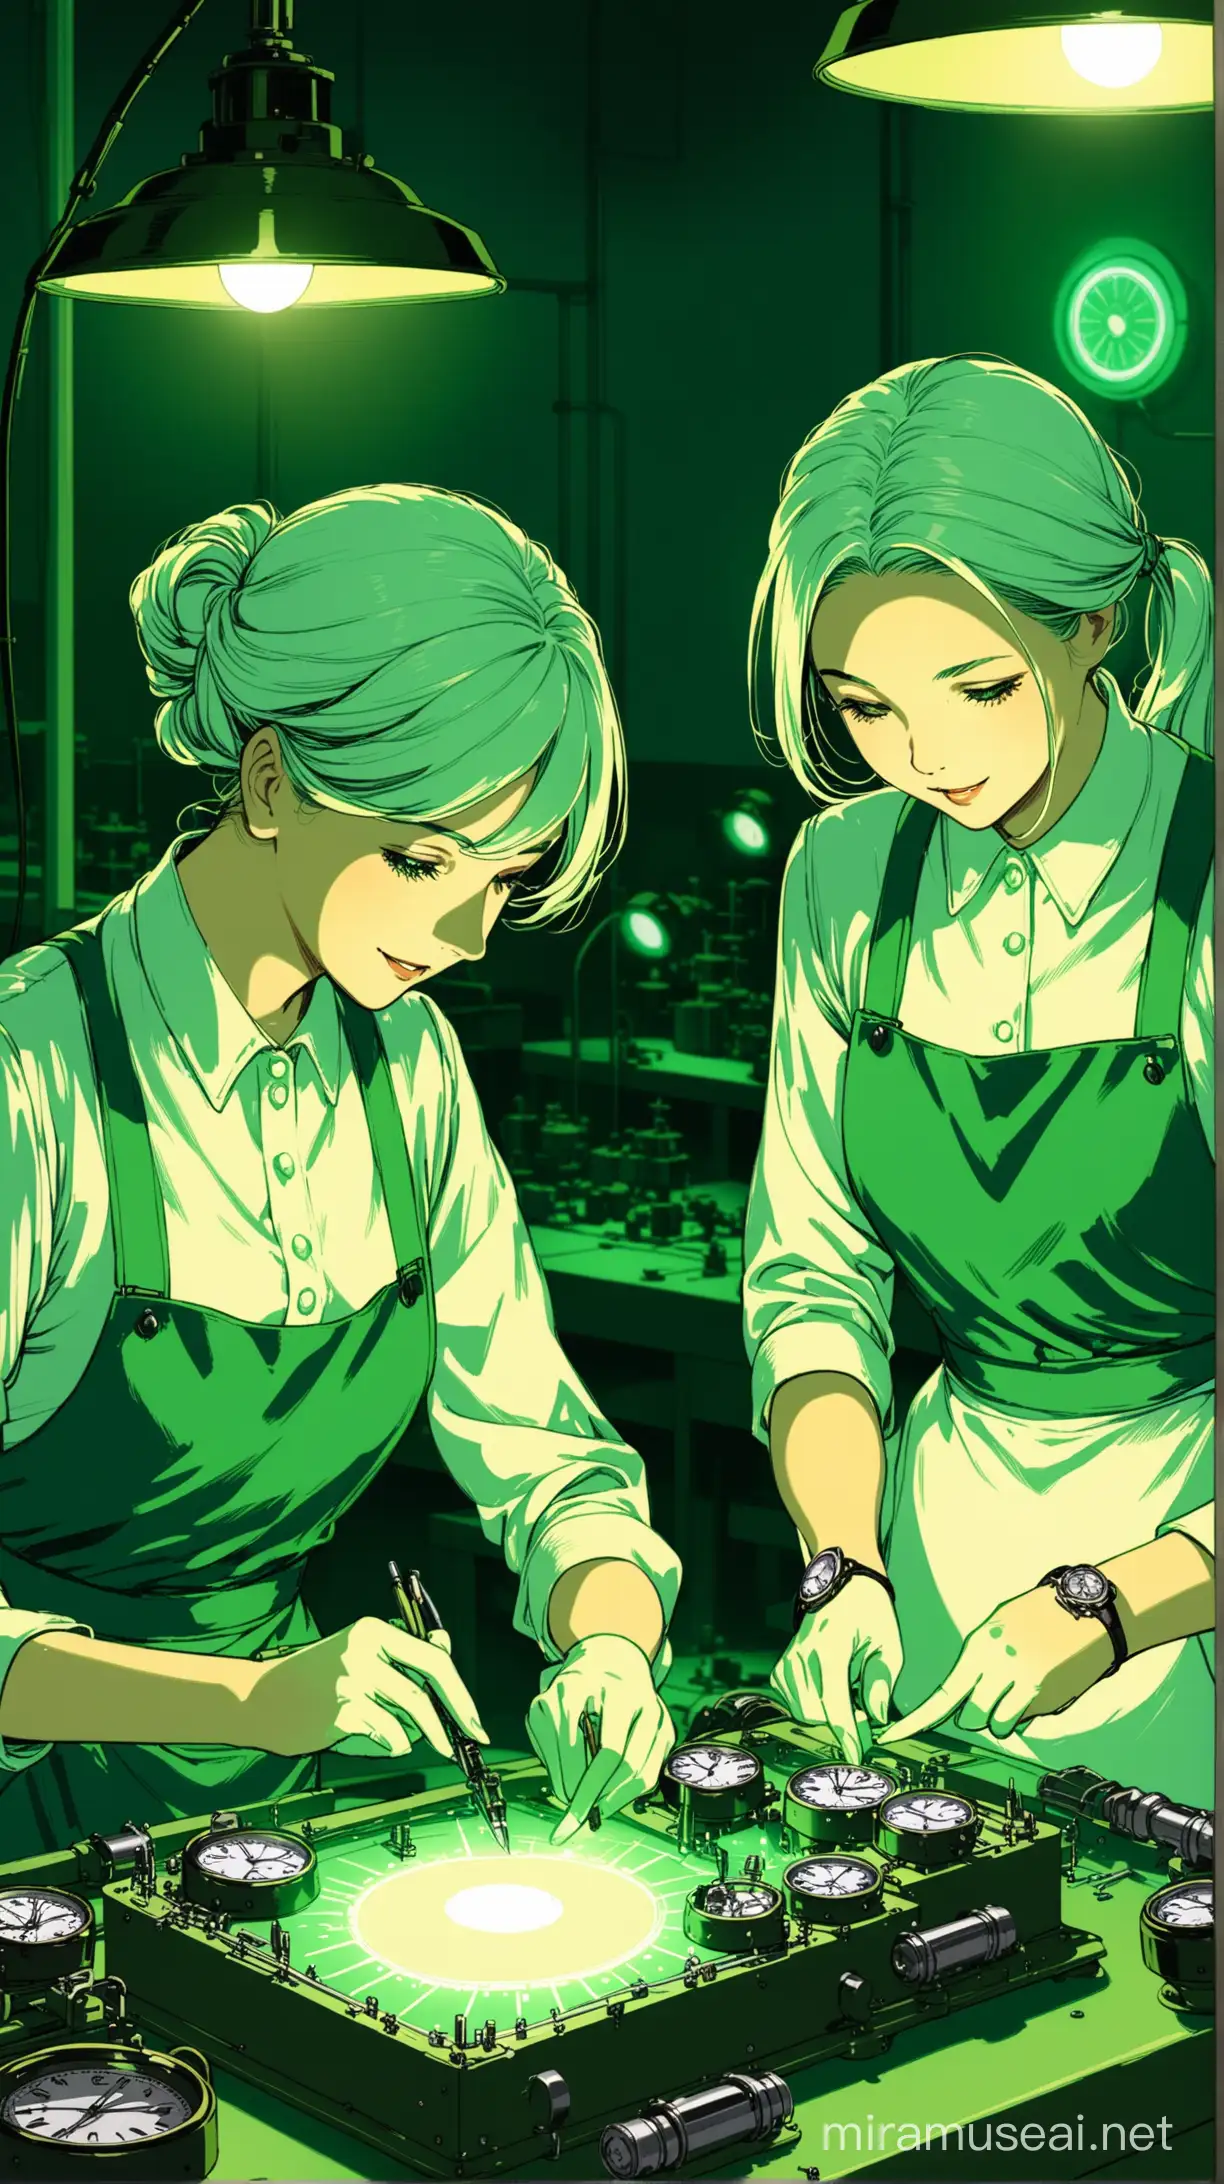 Radium Glowing Girls Crafting Watches in a Factory Setting